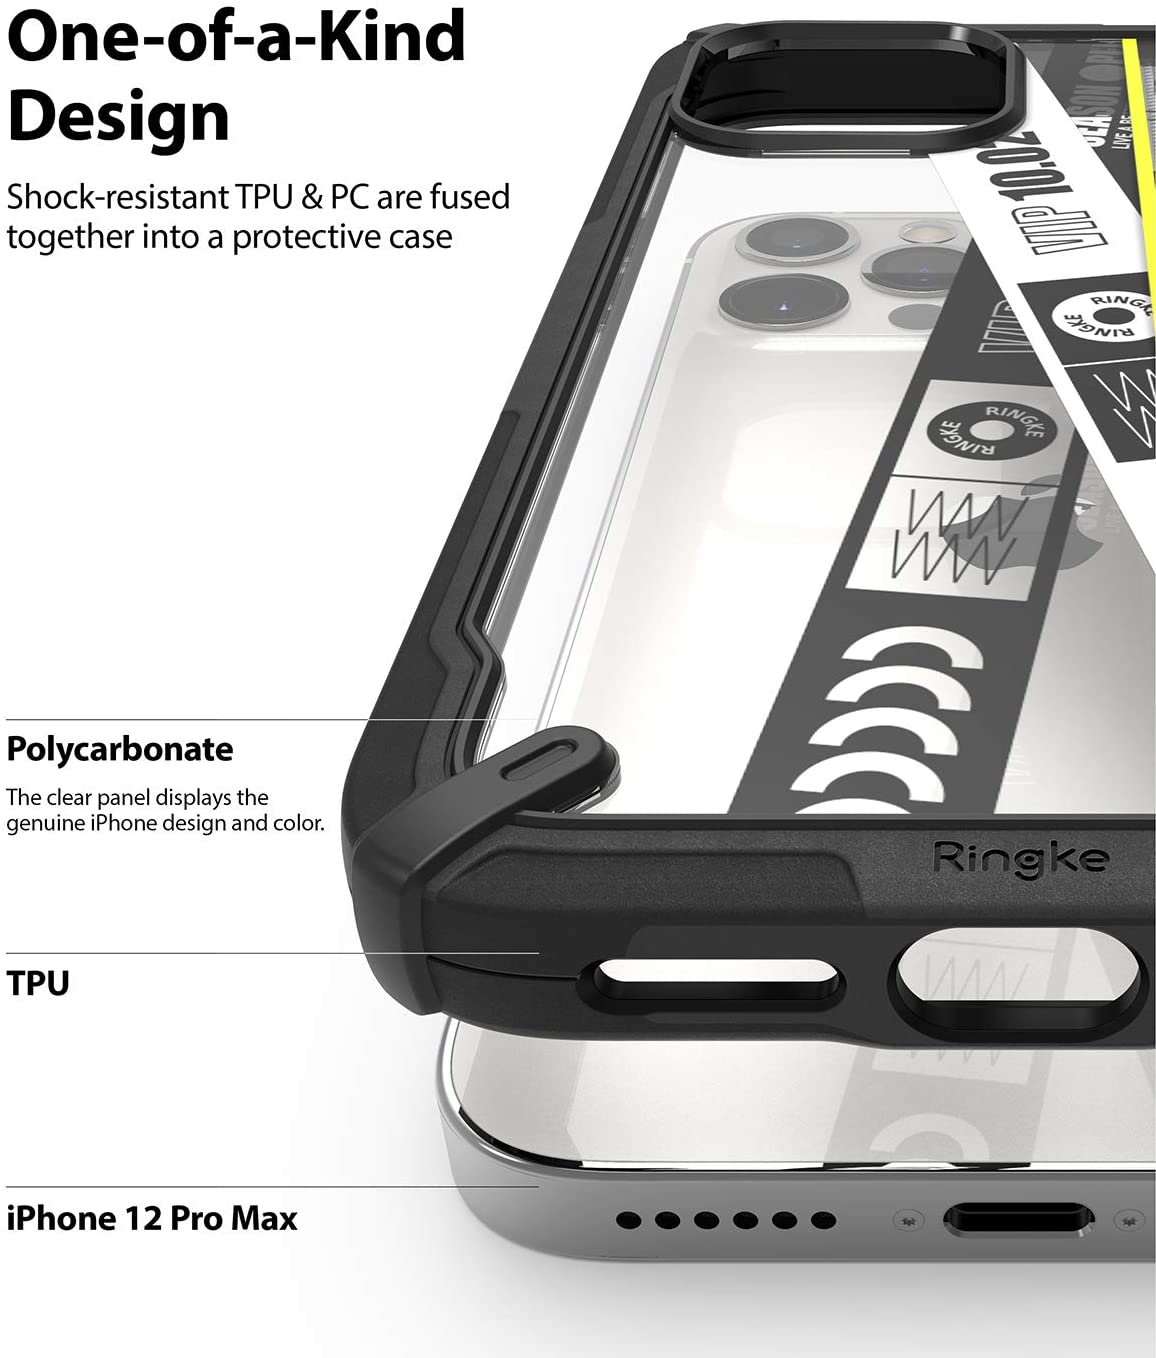 Ringke Fusion-X Compatible with Redmi Note 9 Case, Clear Back Heavy Duty  Shockproof TPU Rugged Bumper Phone Cover - Black